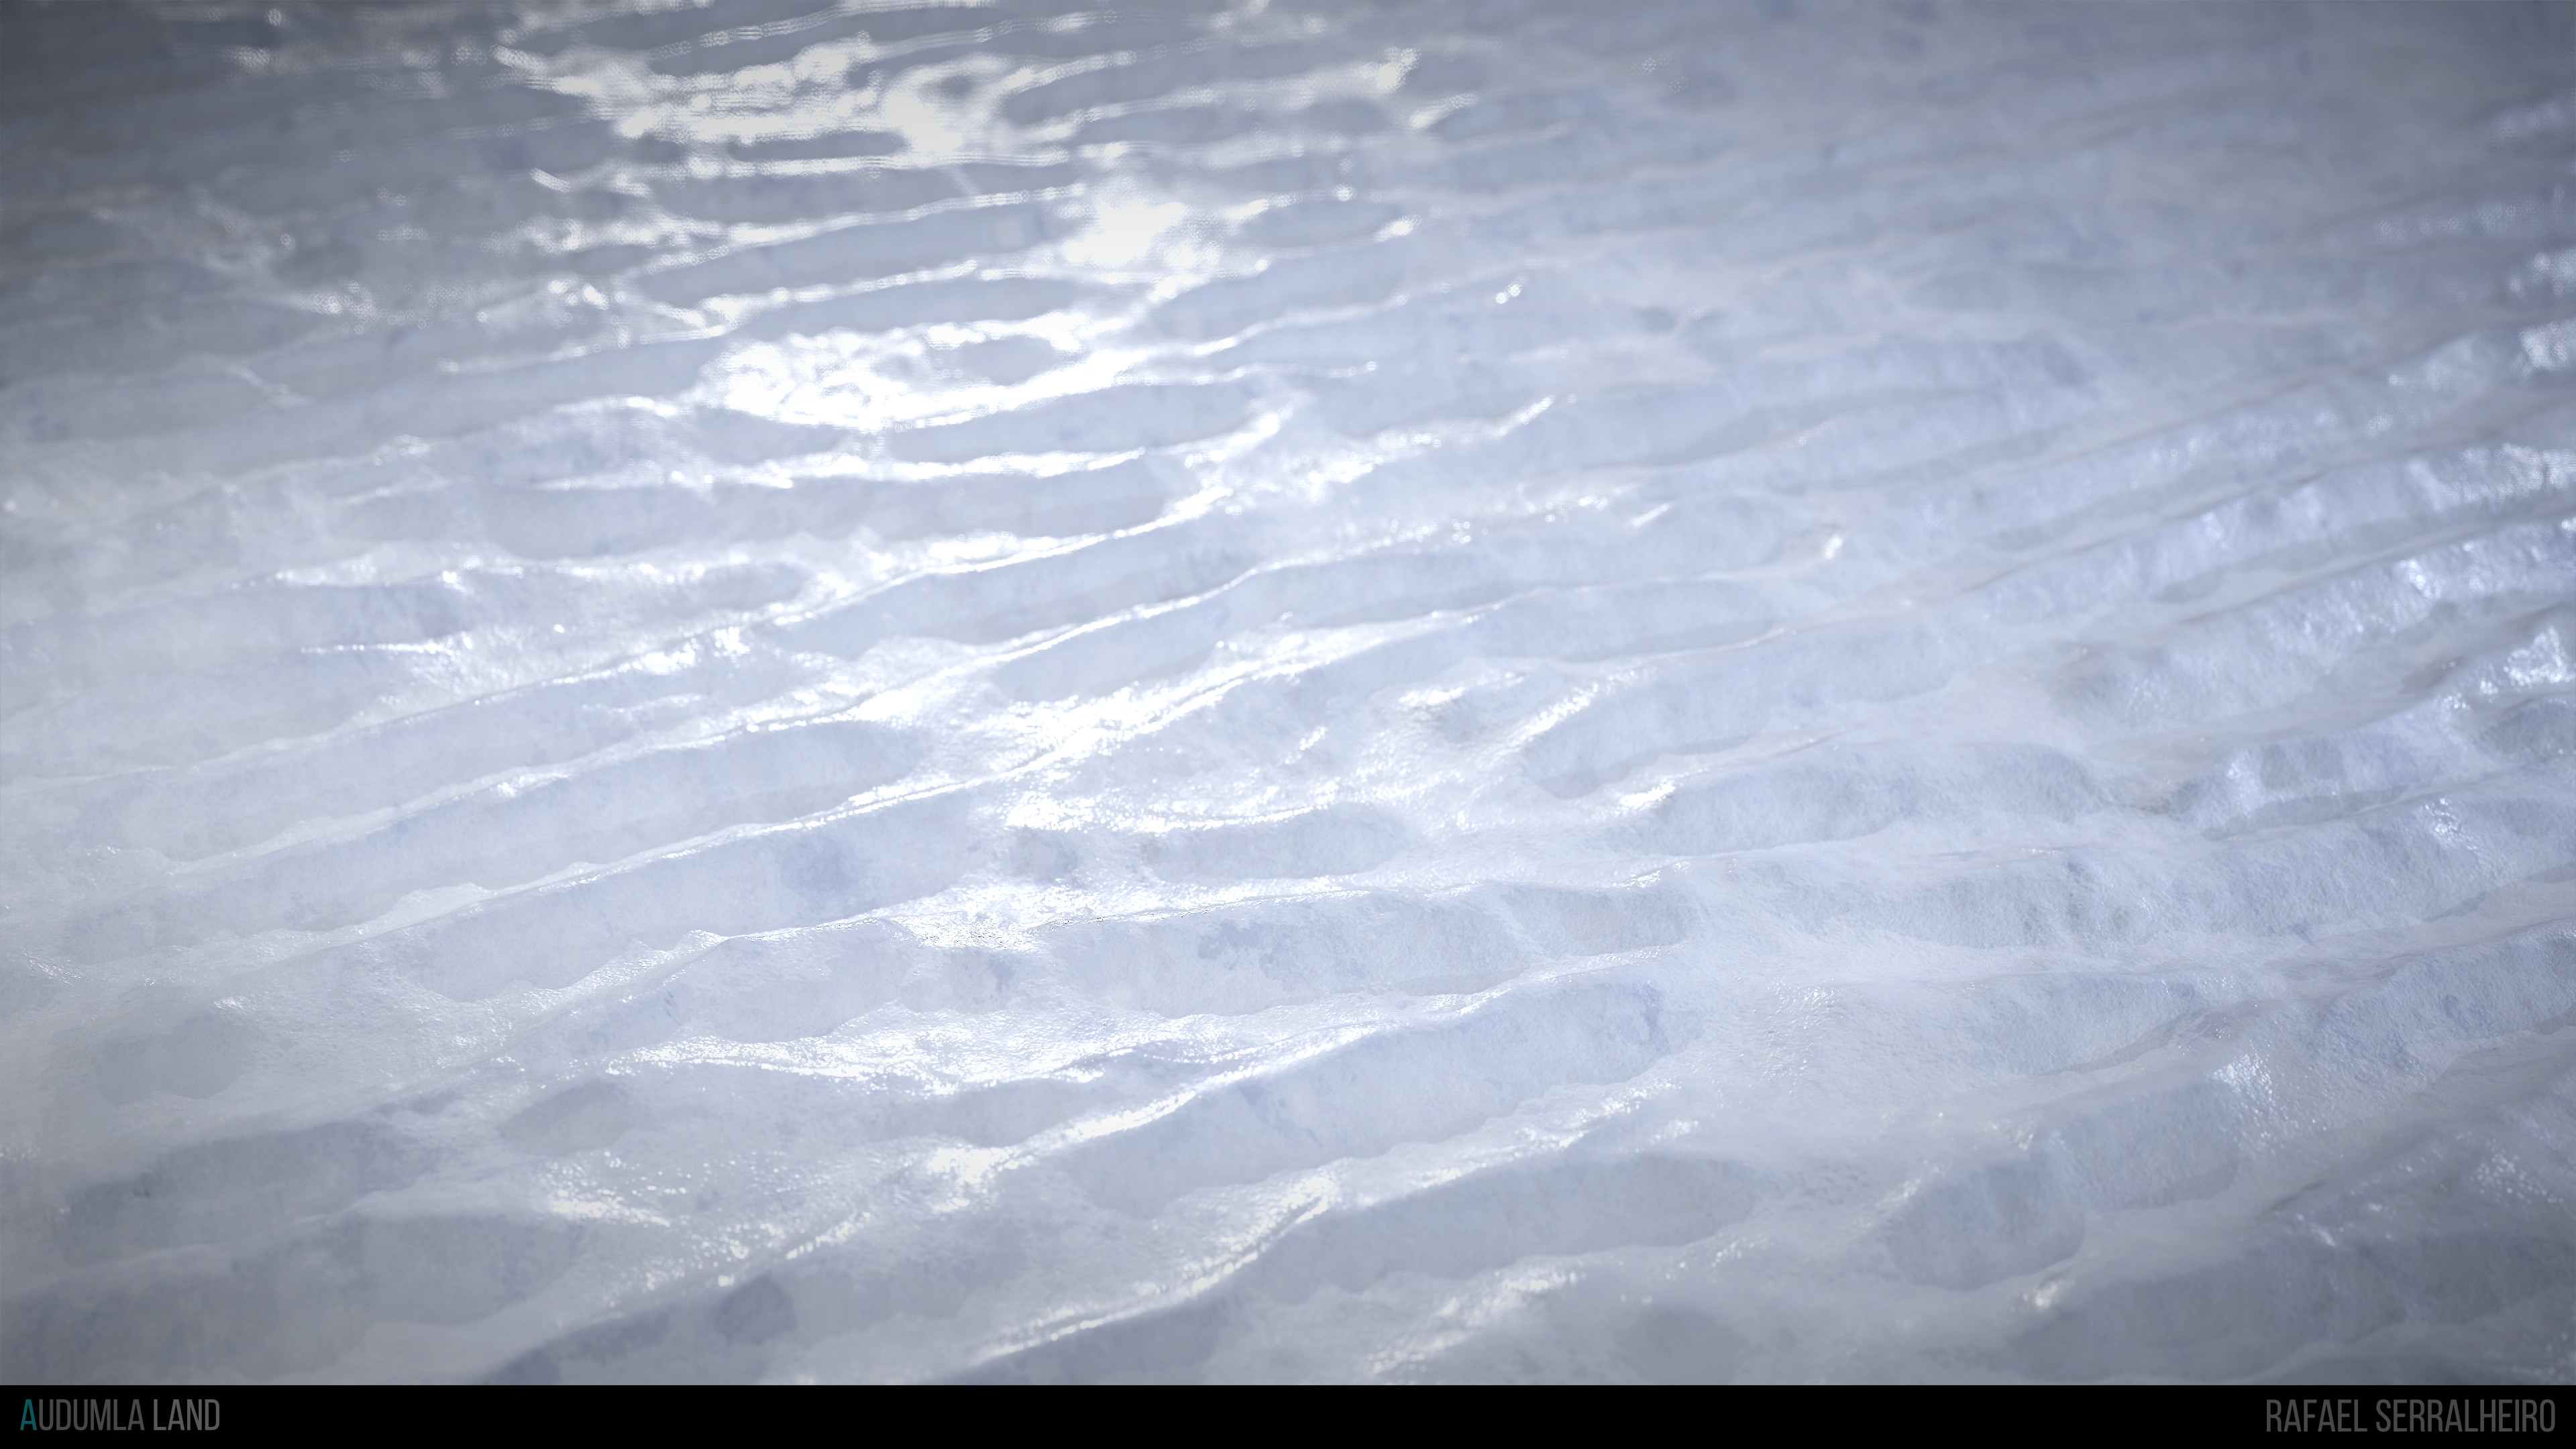 Tillable Snow with waves Material